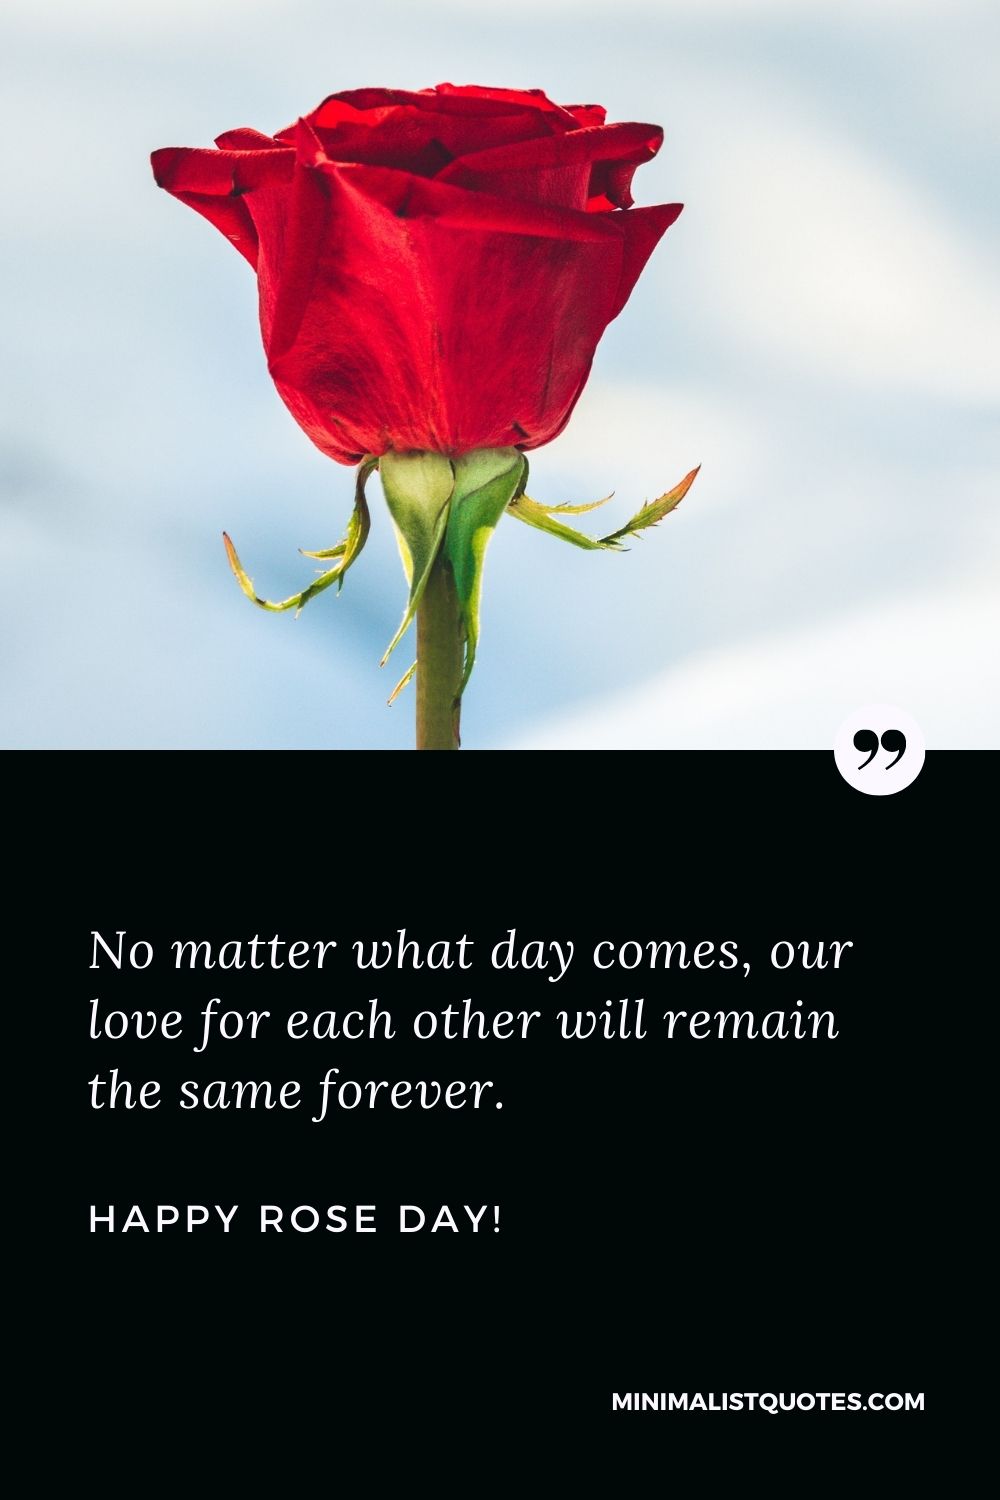 No matter what day comes, our love for each other will remain the ...